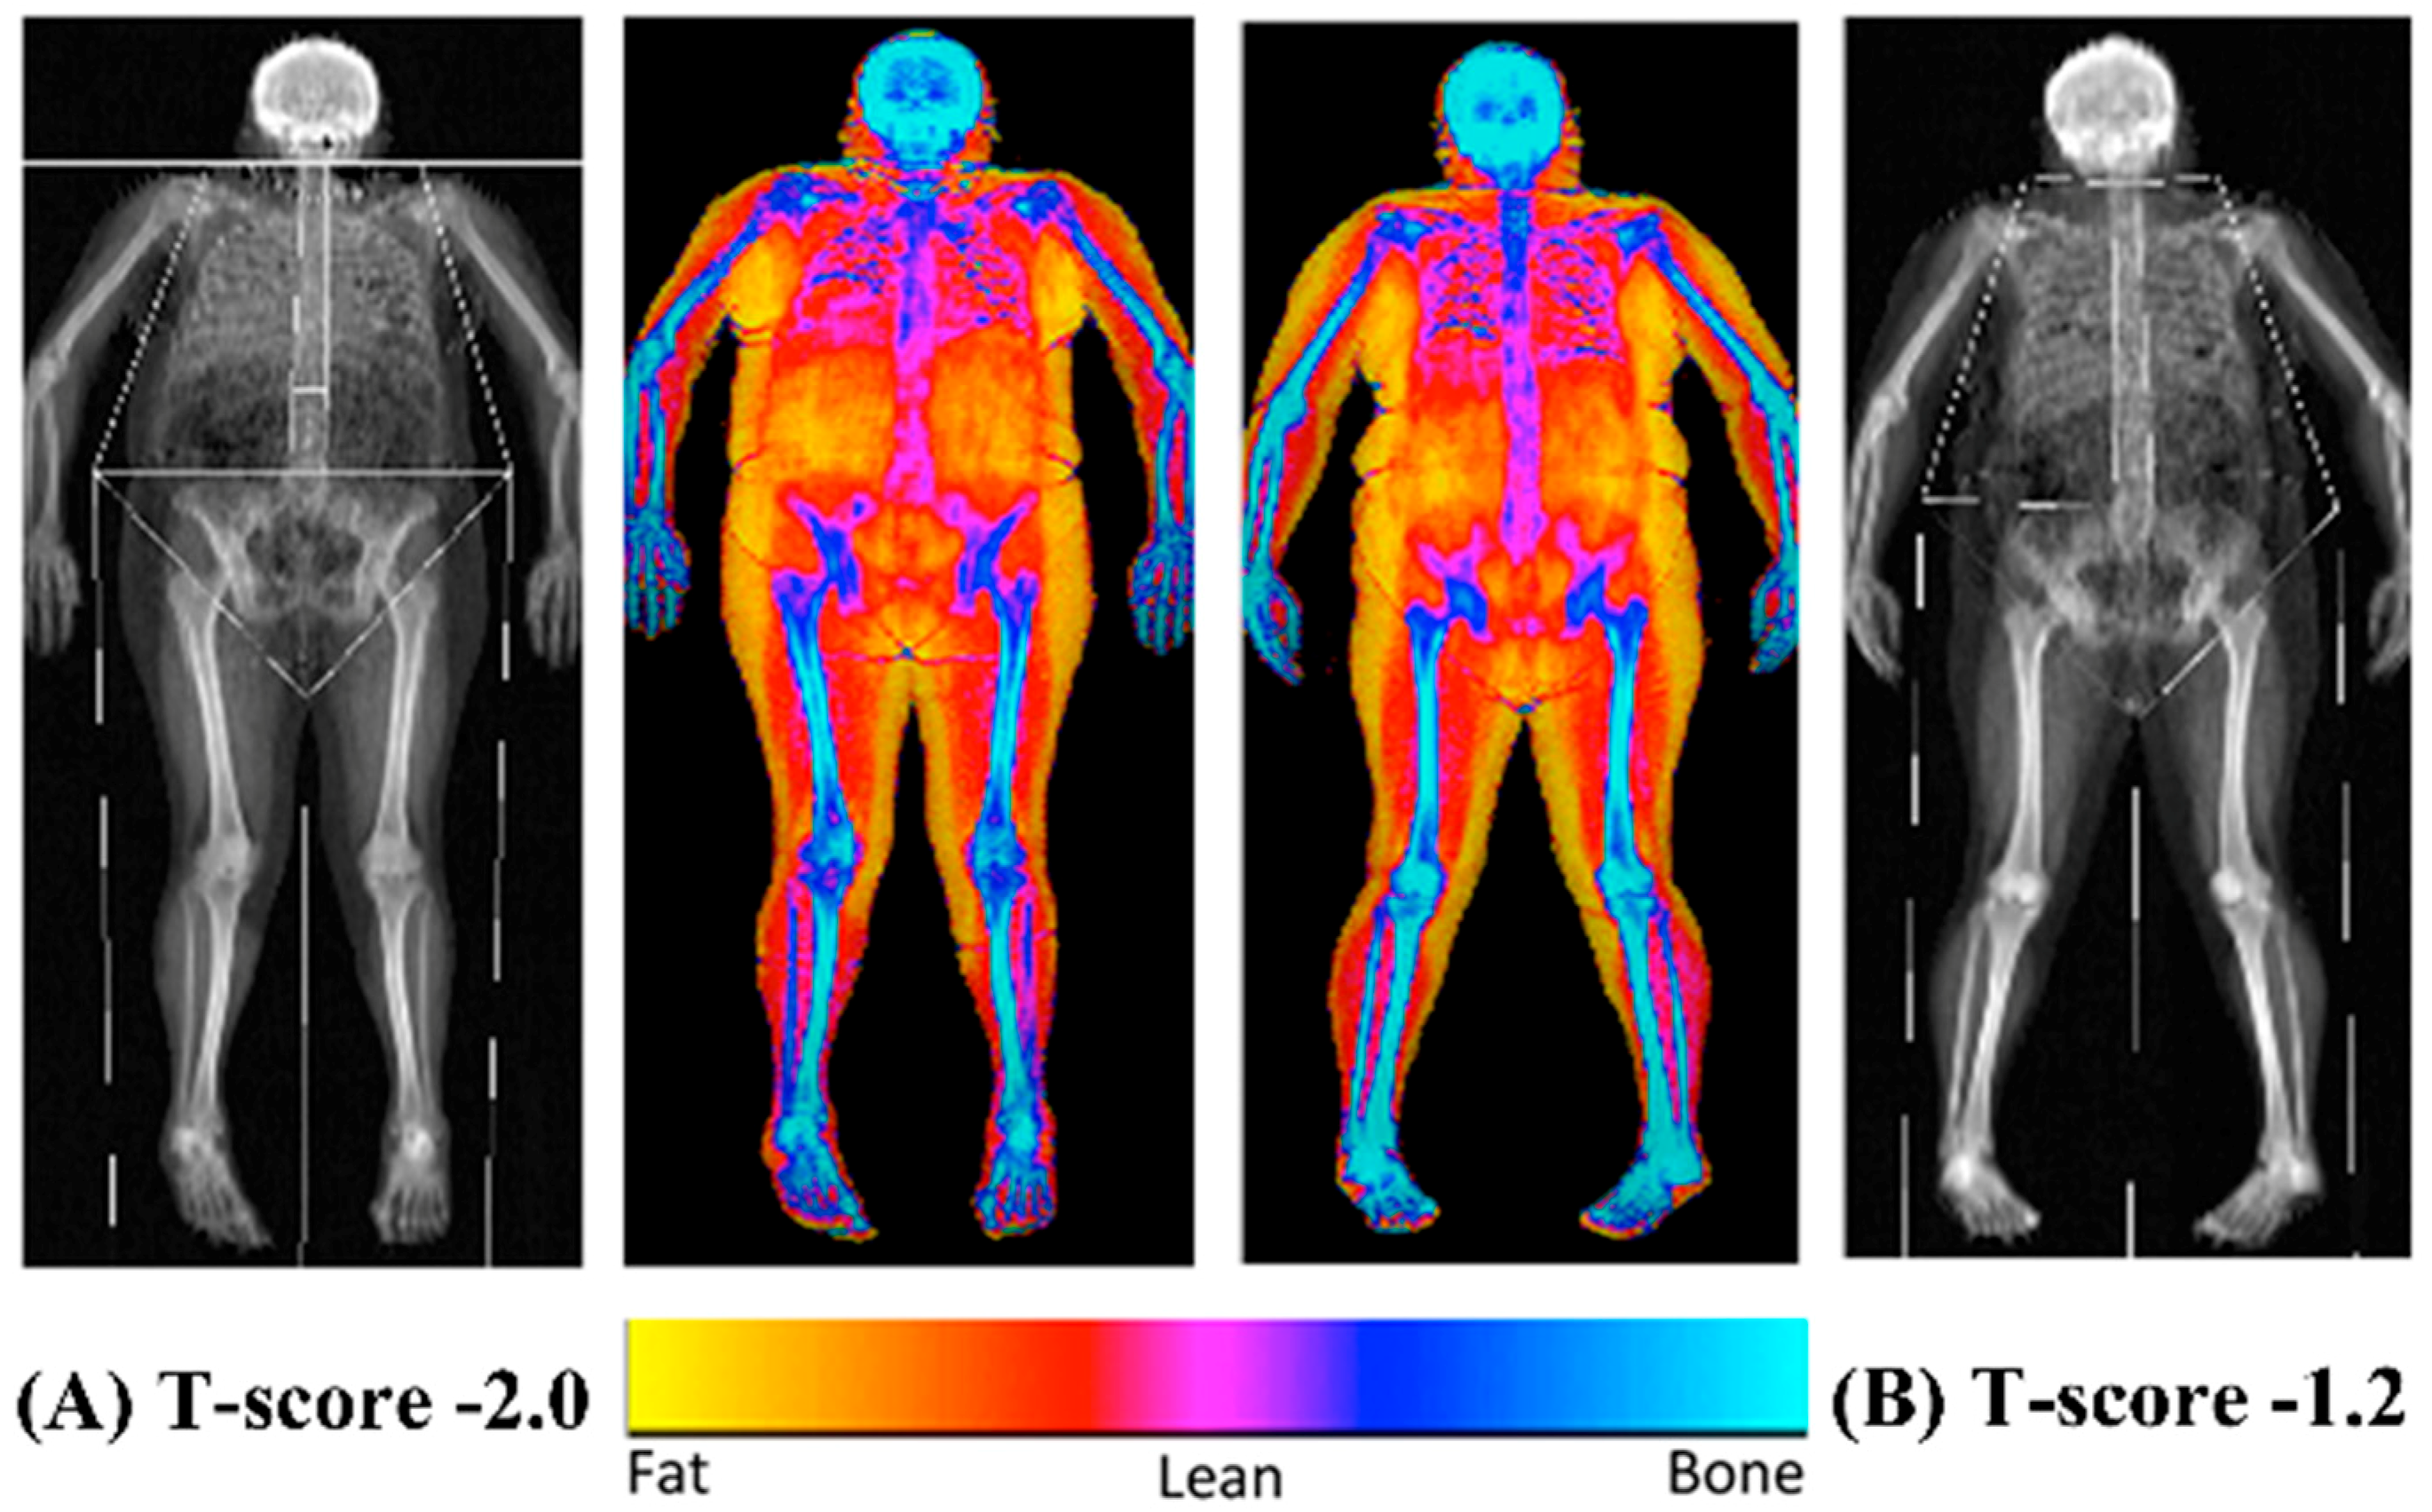 Nutrients | Free Full-Text | Body Fat Percentage, Body Mass Index, Fat Mass  Index and the Ageing Bone: Their Singular and Combined Roles Linked to  Physical Activity and Diet